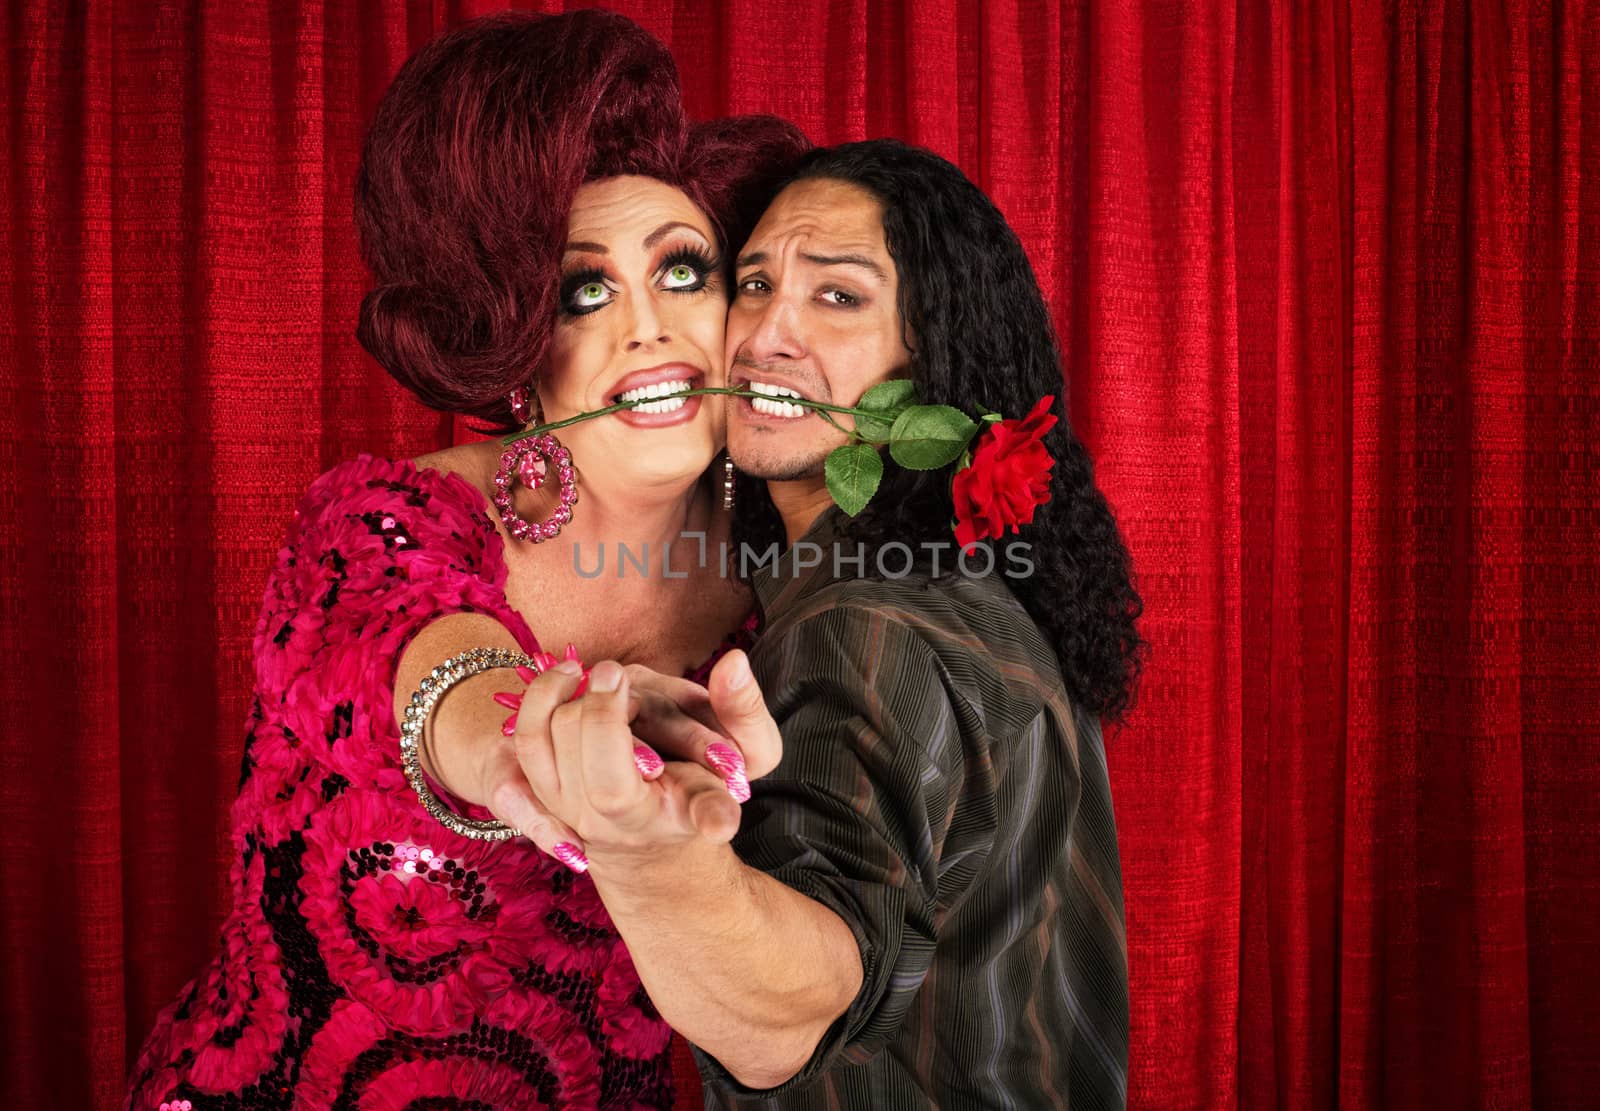 Embarrassed man with rose in mouth dancing with drag queen 